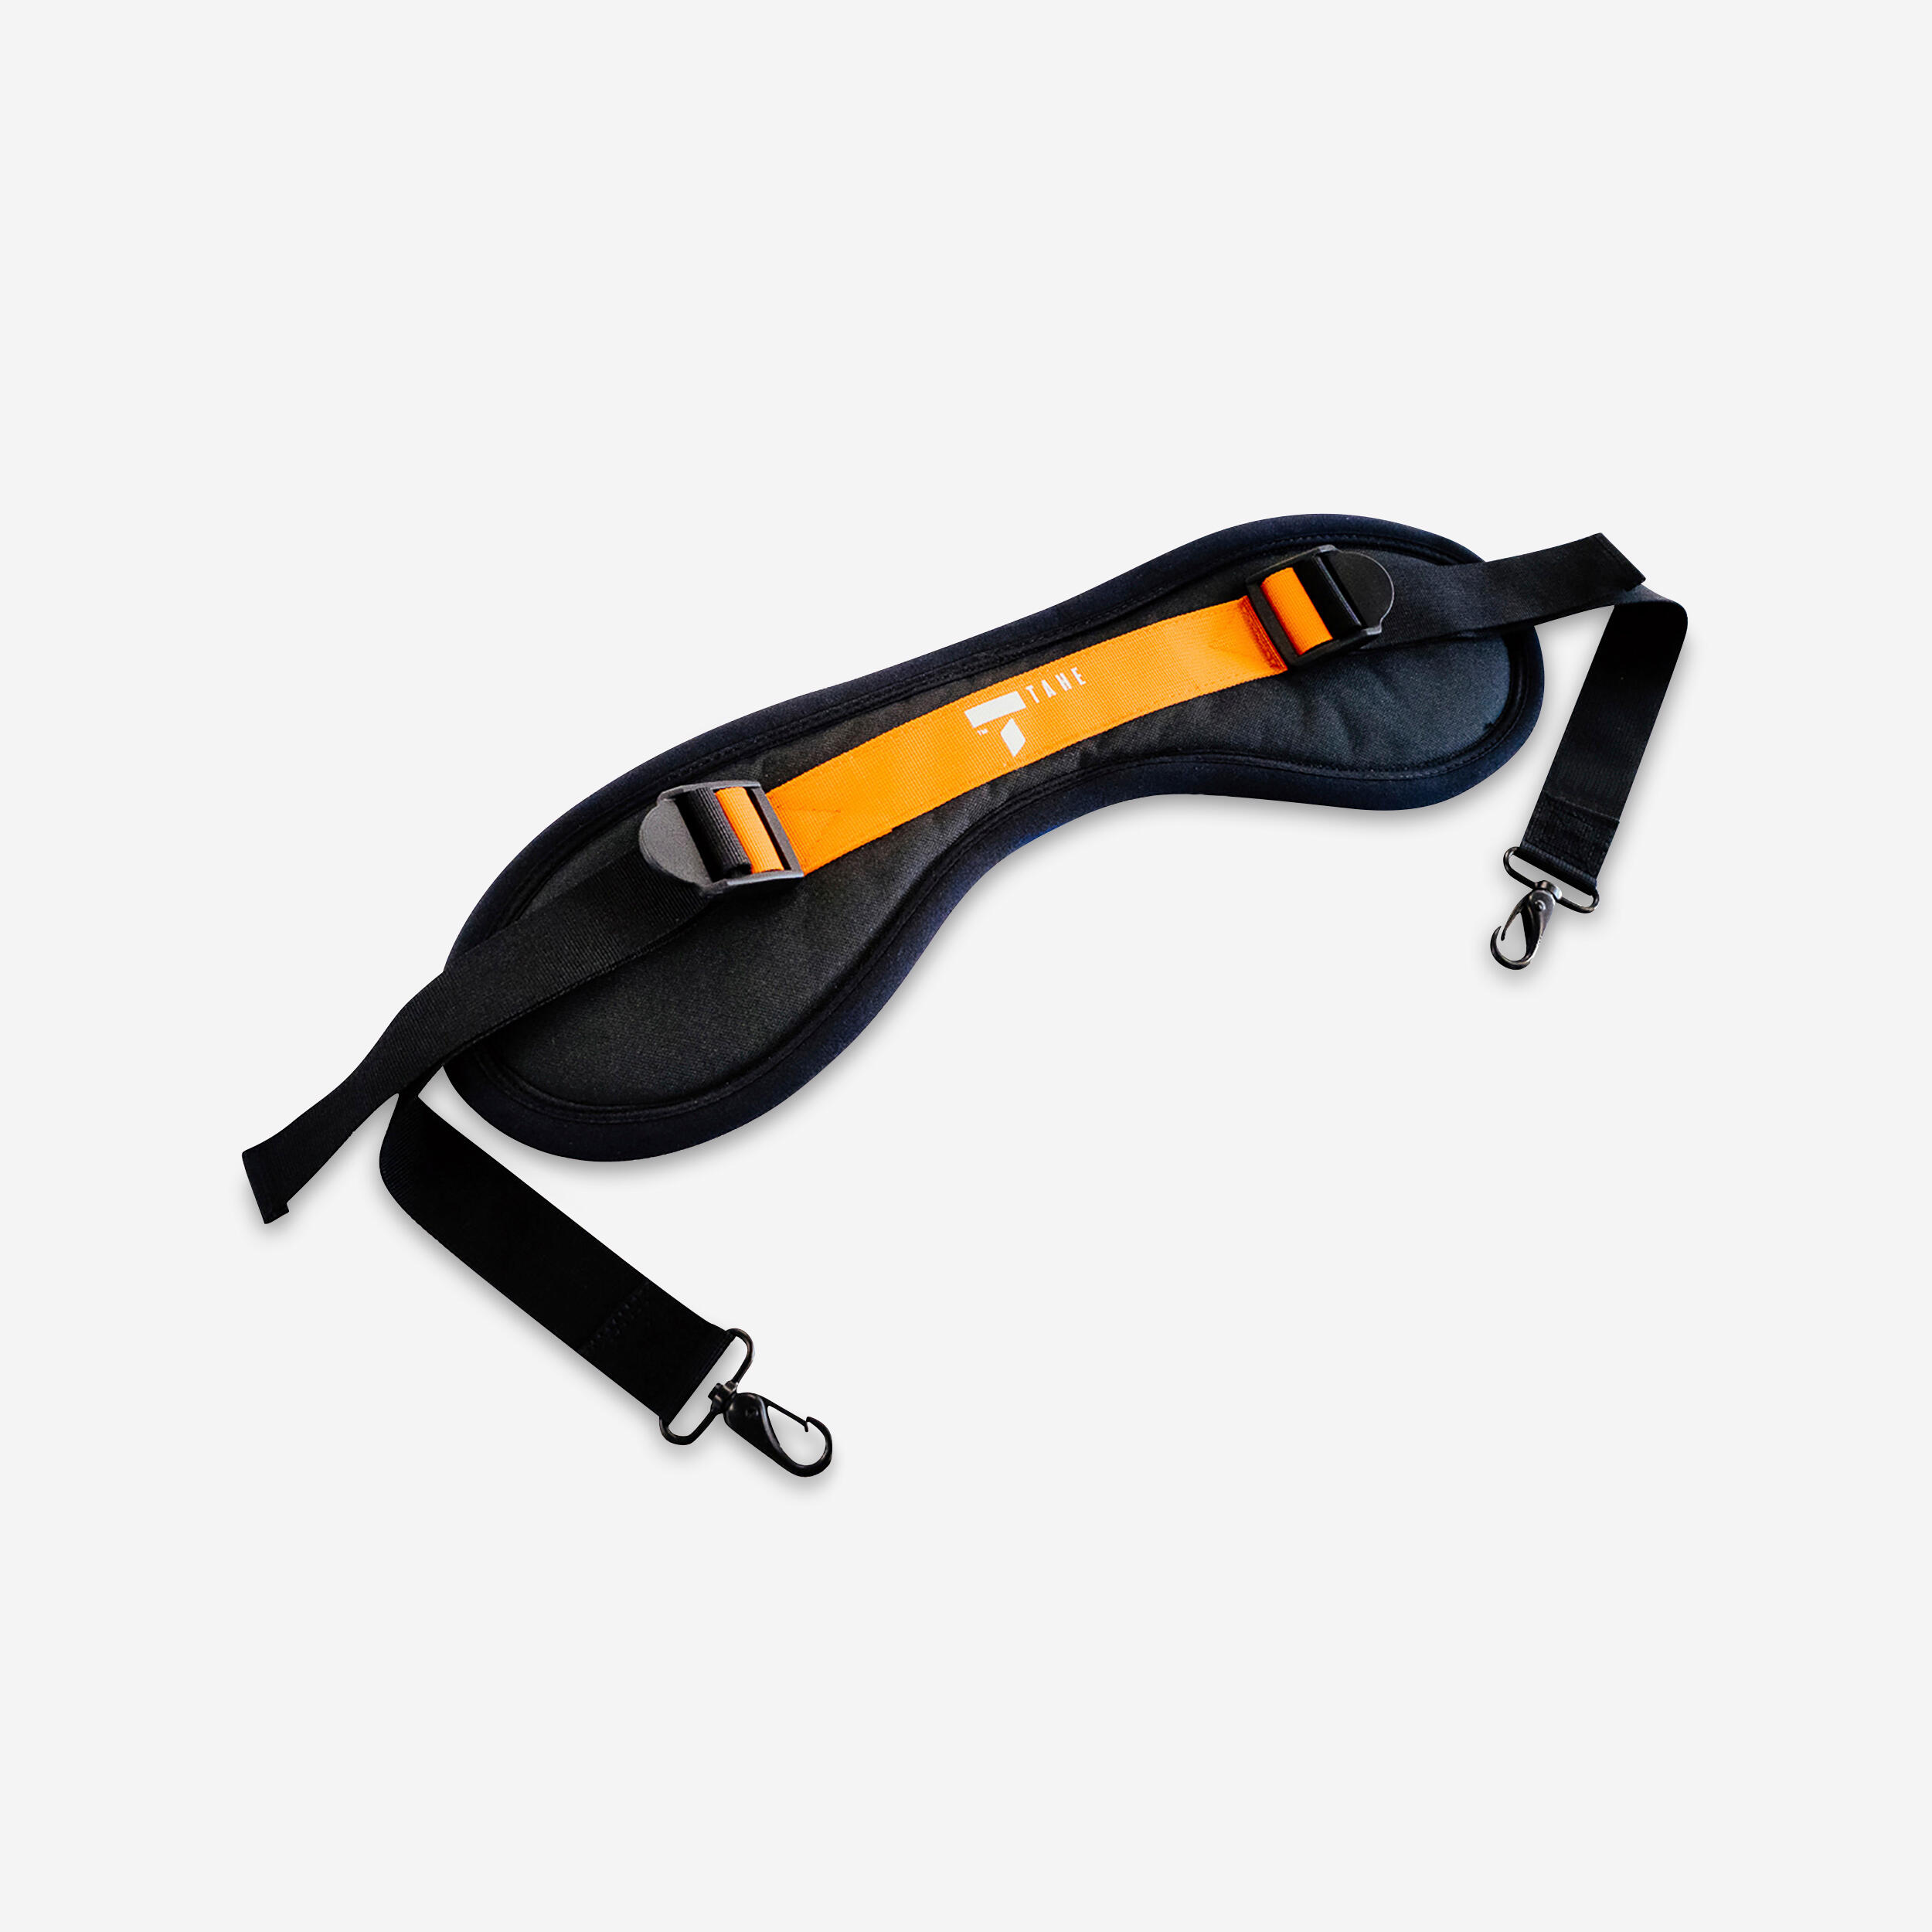 THIGH STRAP OR CARRY HANDLE TAHE FOR A RIGID KAYAK 1/3